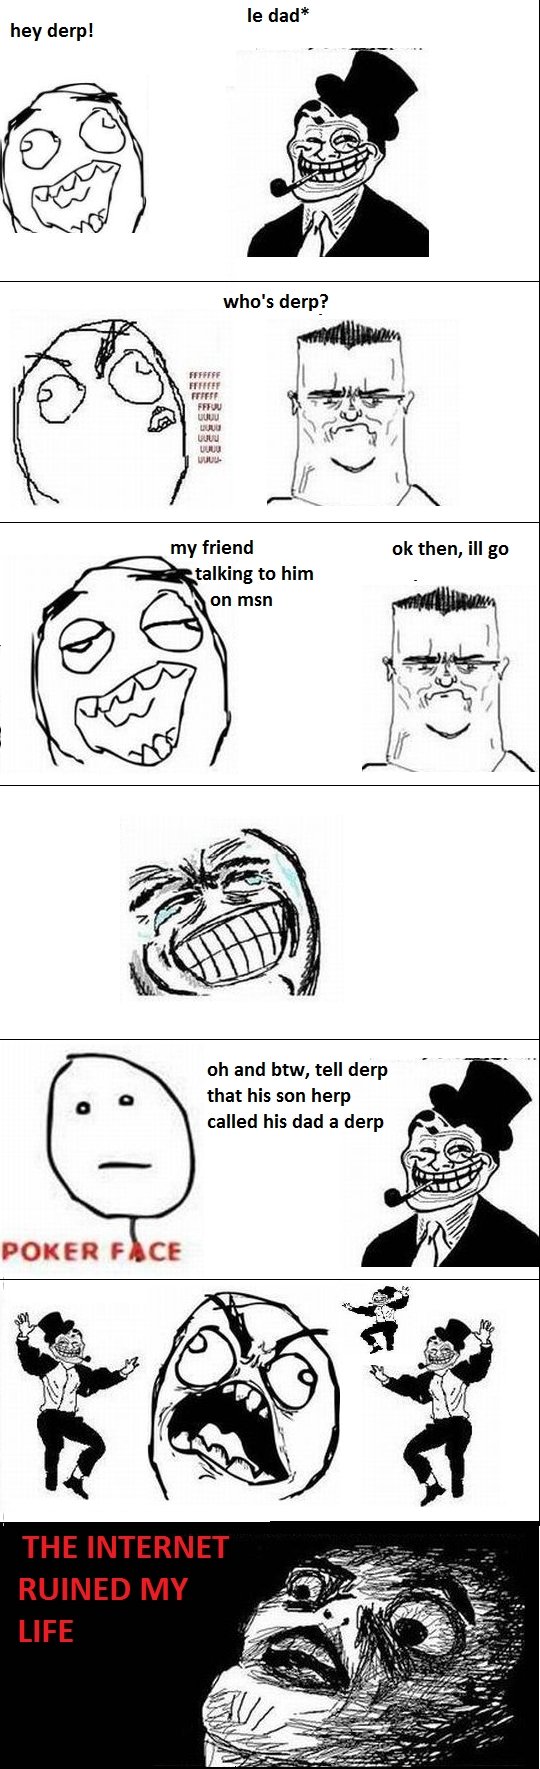 Call Your Dad A Derp